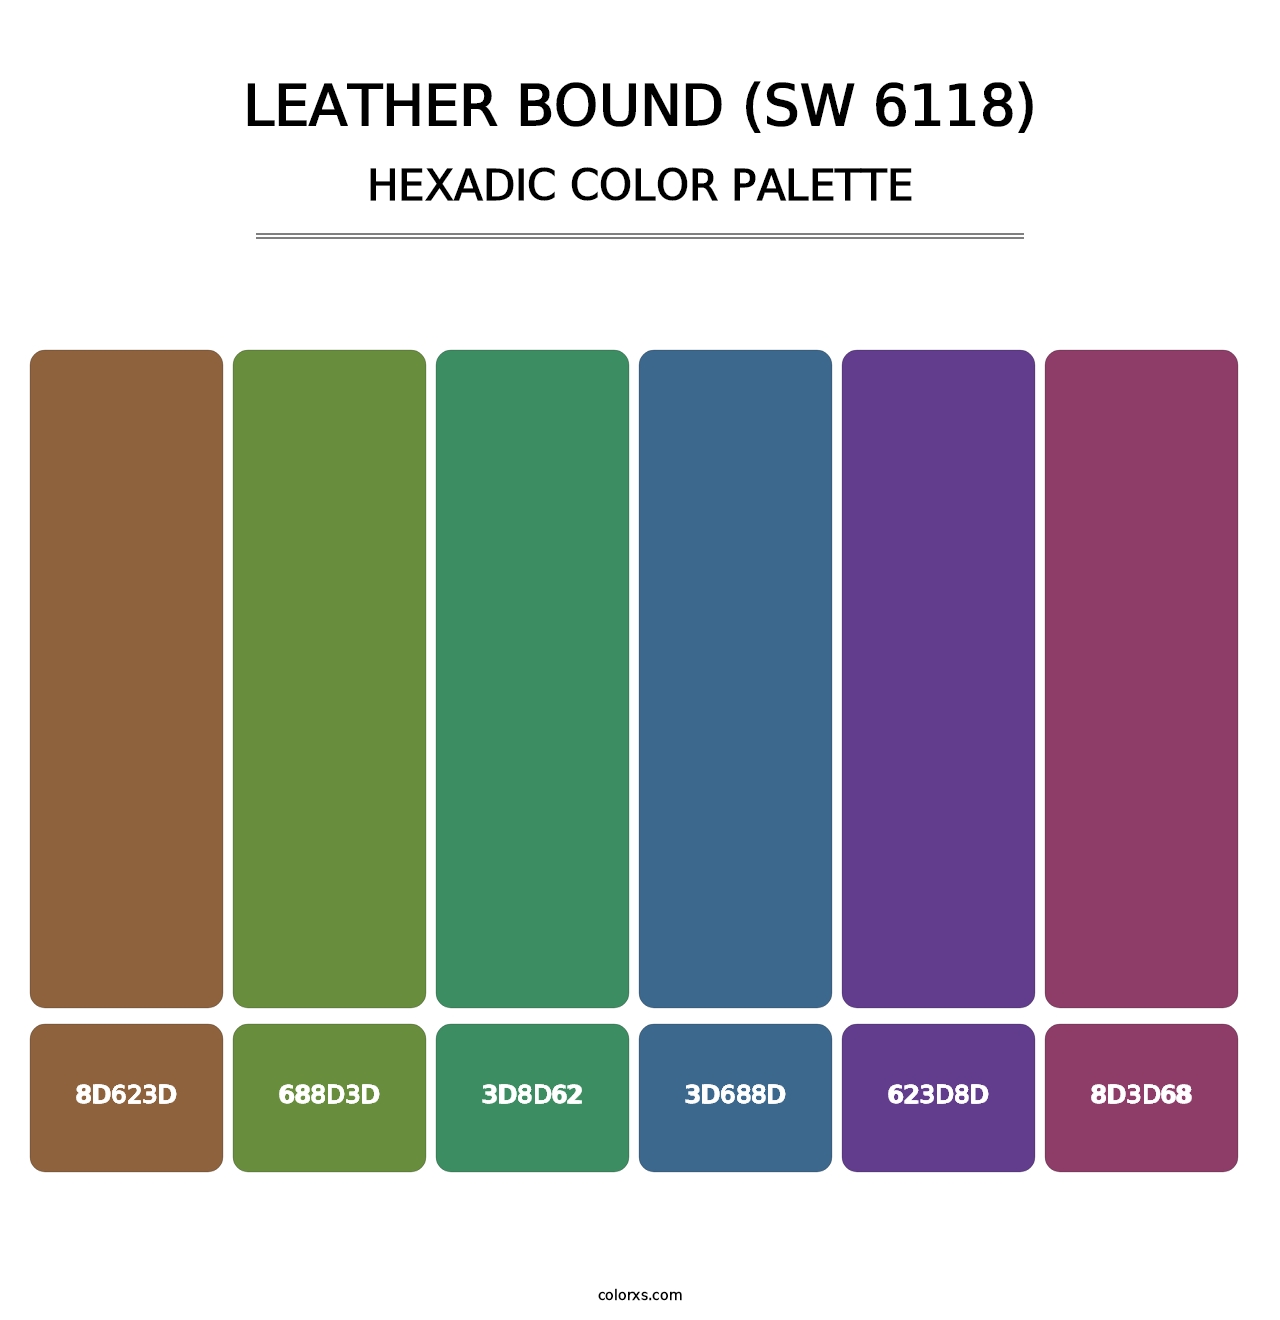 Leather Bound (SW 6118) - Hexadic Color Palette